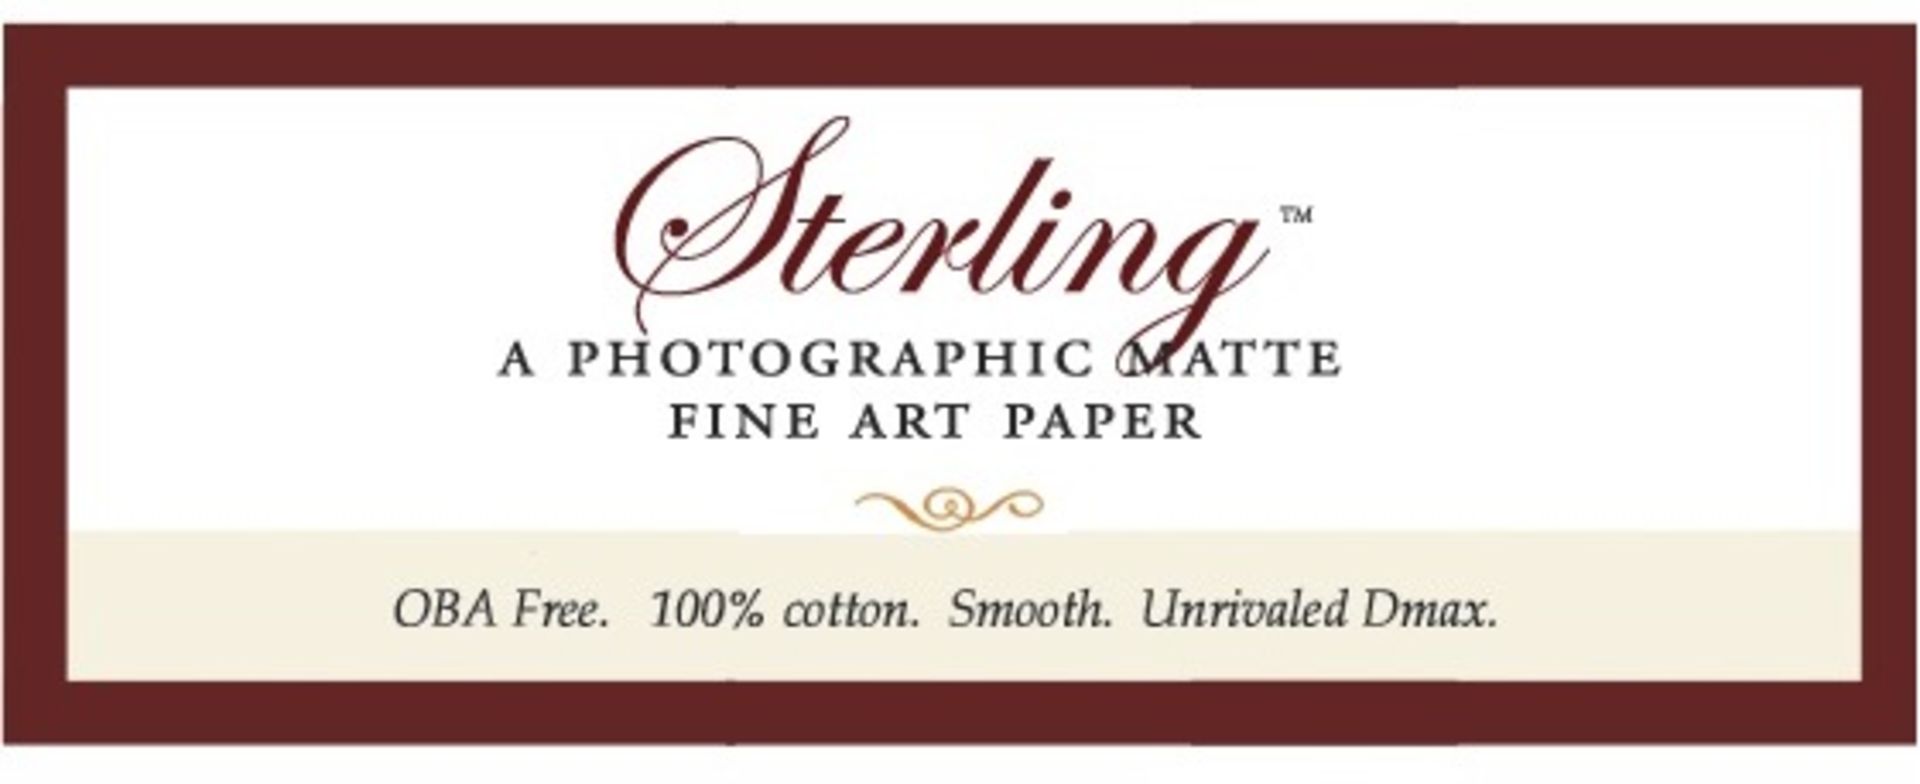 1 x Roll of Breathing Colour STERLING Photographic Matte Fine Art Paper - Size 17" x 50' - 250gsm - - Image 3 of 5